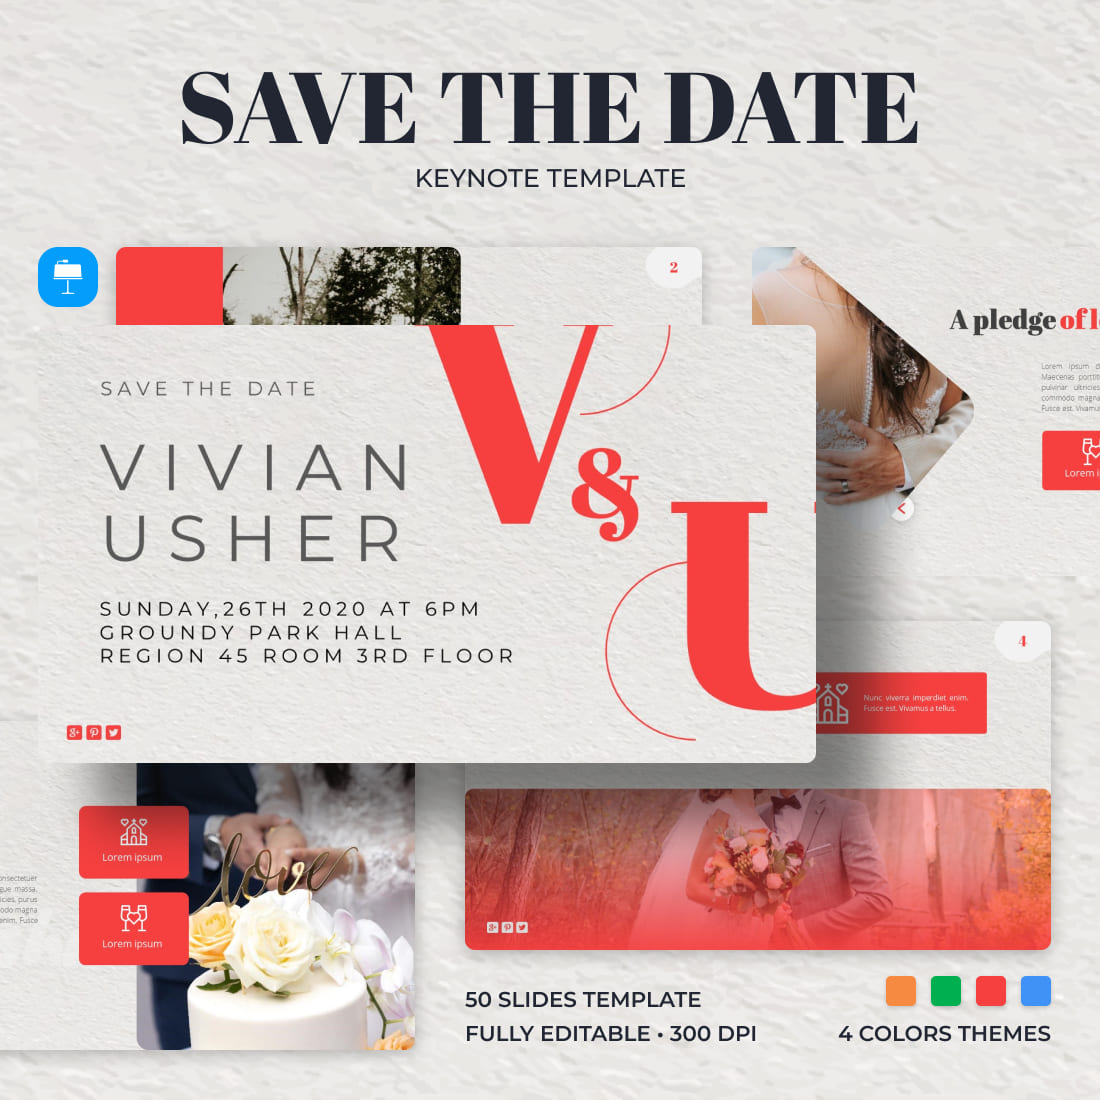 Save the Date Keynote Template.